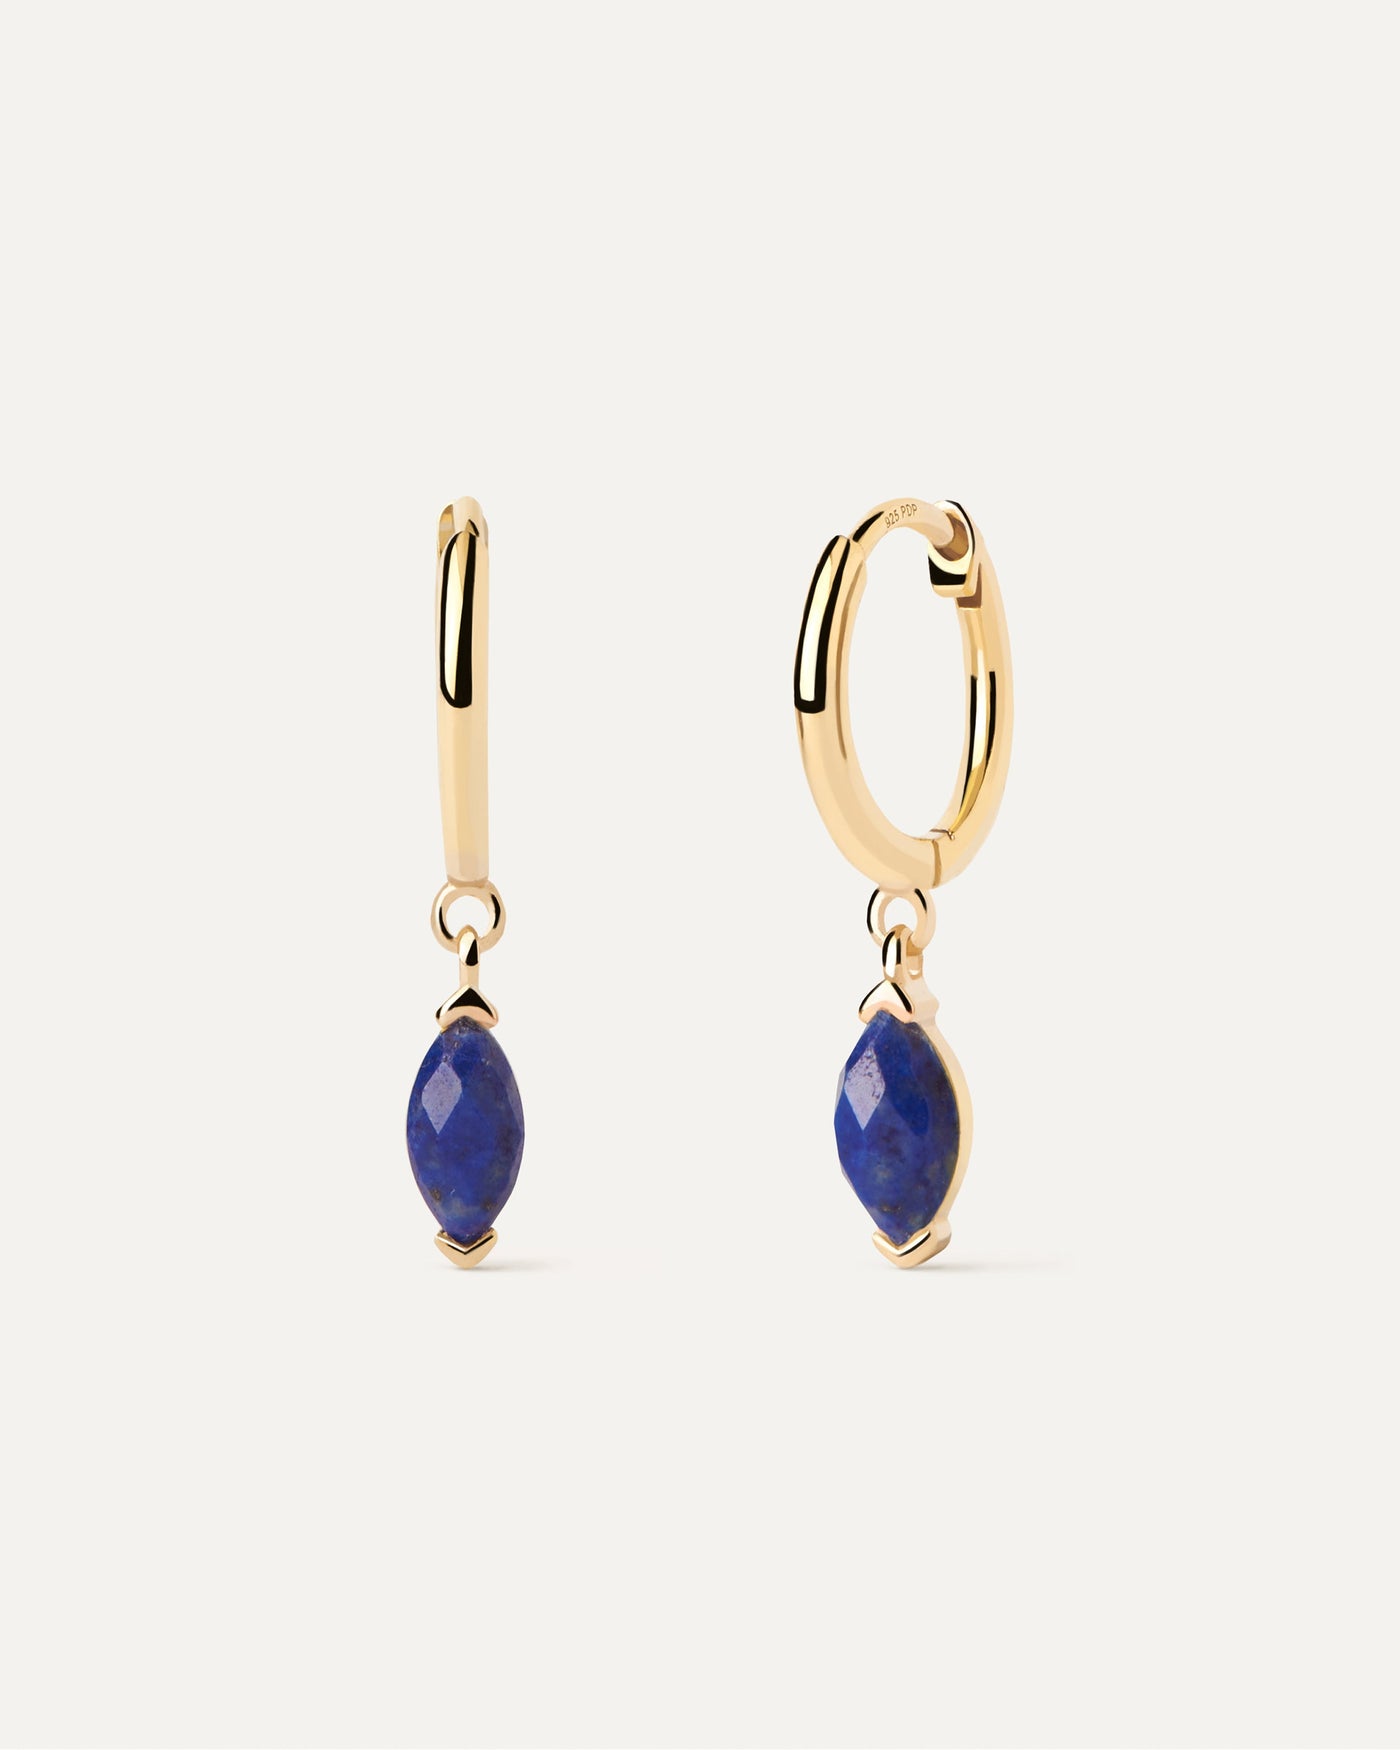 2023 Selection | Lapis Lazuli Nomad Hoops.  Gold-plated drop hoops with pear shape blue gemstone pendant. Get the latest arrival from PDPAOLA. Place your order safely and get this Best Seller. Free Shipping.